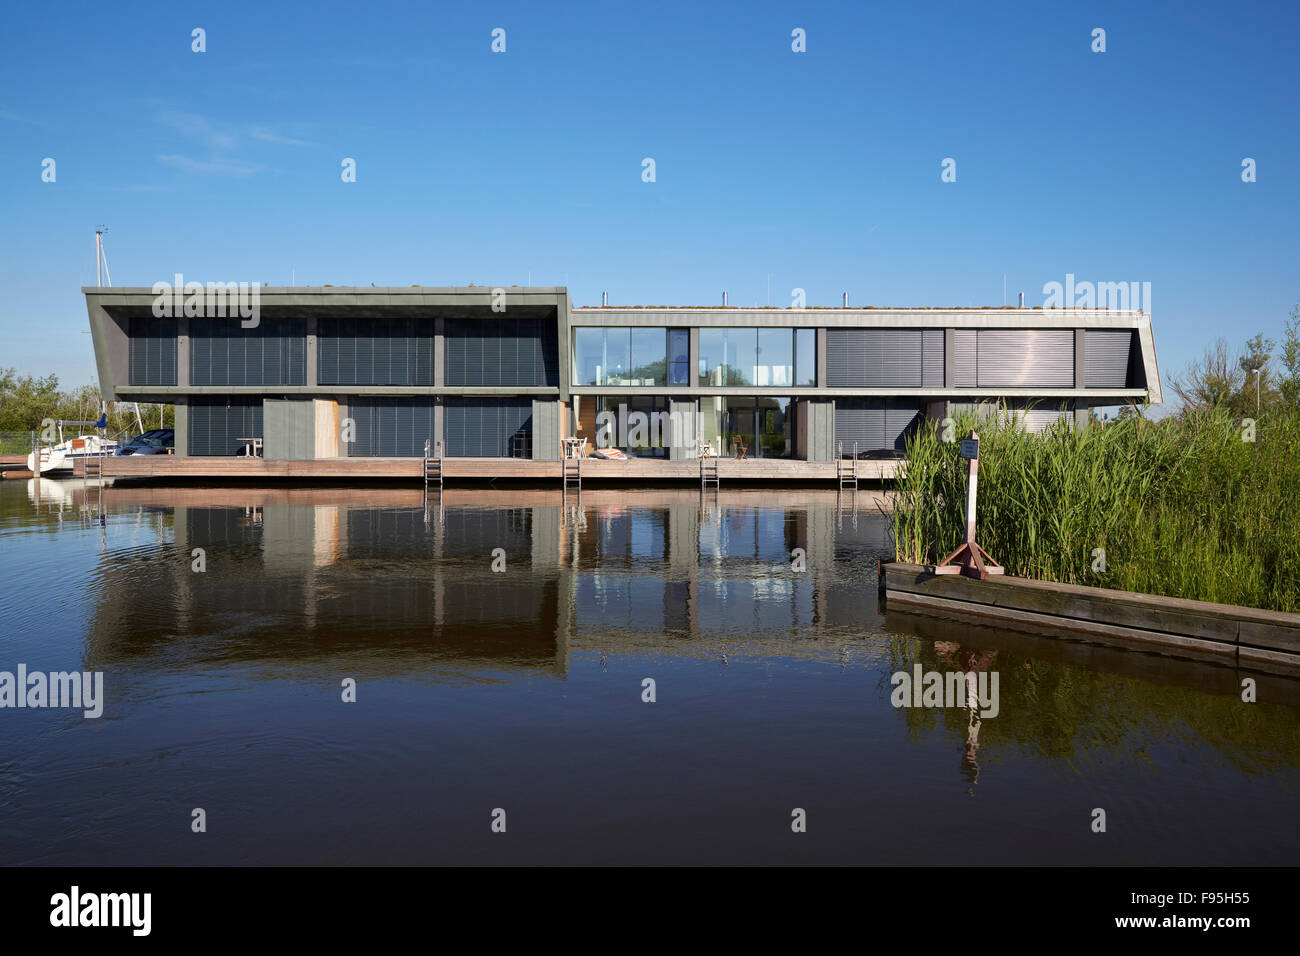 Housing development at Lake Neusiedl, Neusiedl am See, Burgenland, Austria. Exterior view with waterside foliage of the contemporary lakeside housing development at Neusiedl am See, Burgenland, Austria Stock Photo